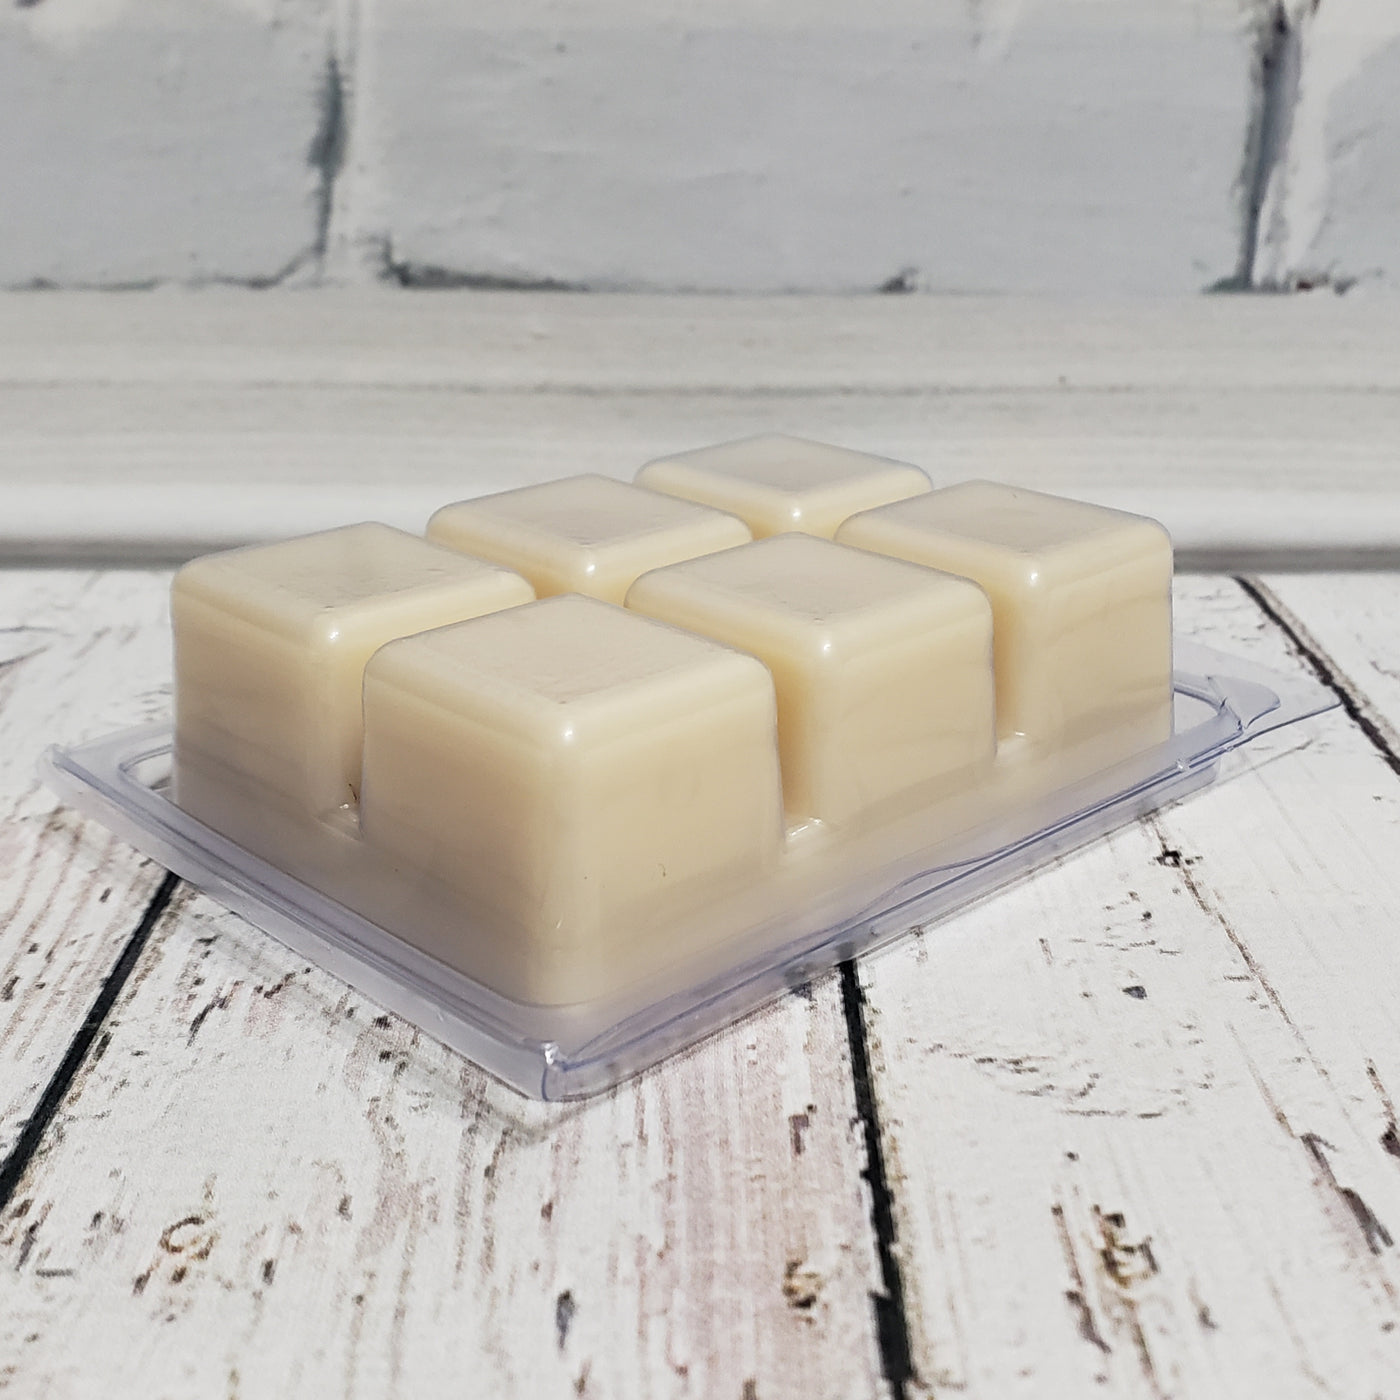 Combo Deal of Wax Melts - 3 for $15